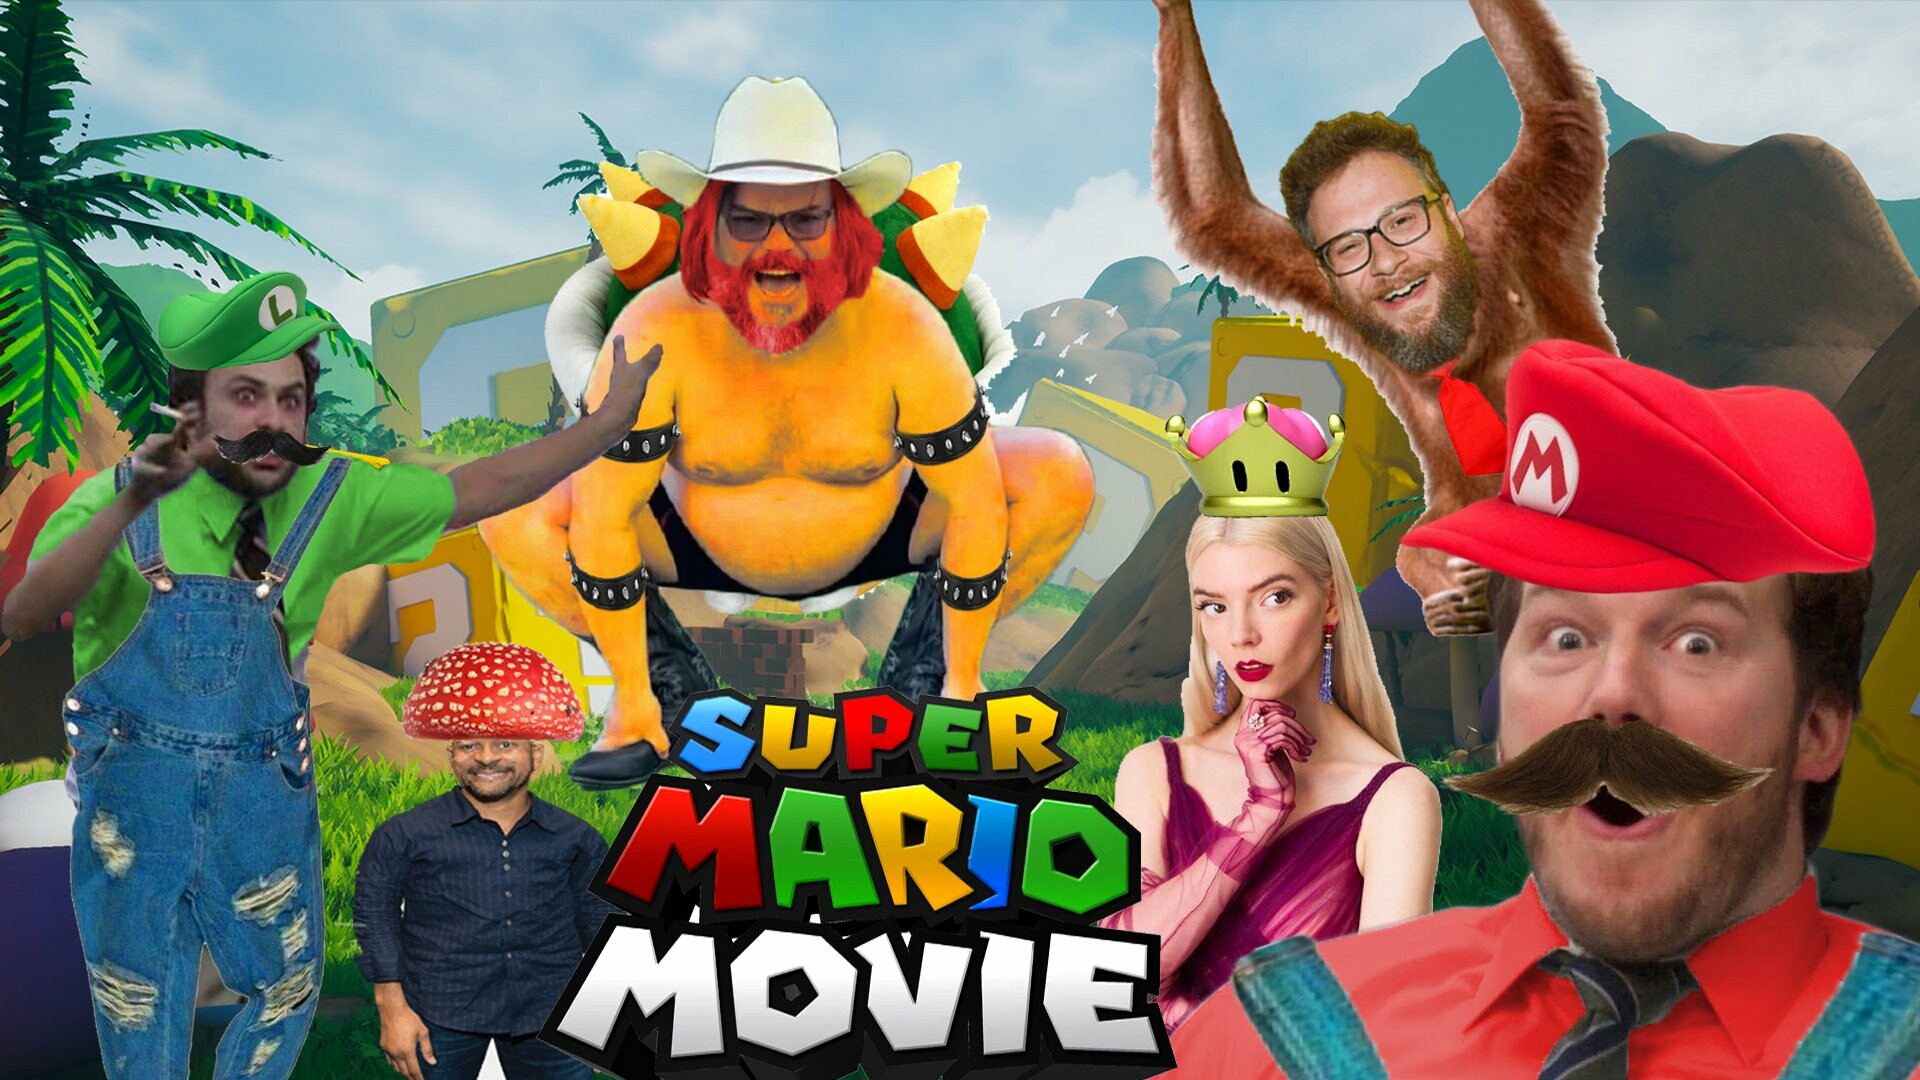 Welcome to 2021 timeline. Untitled Super Mario Bros. Film